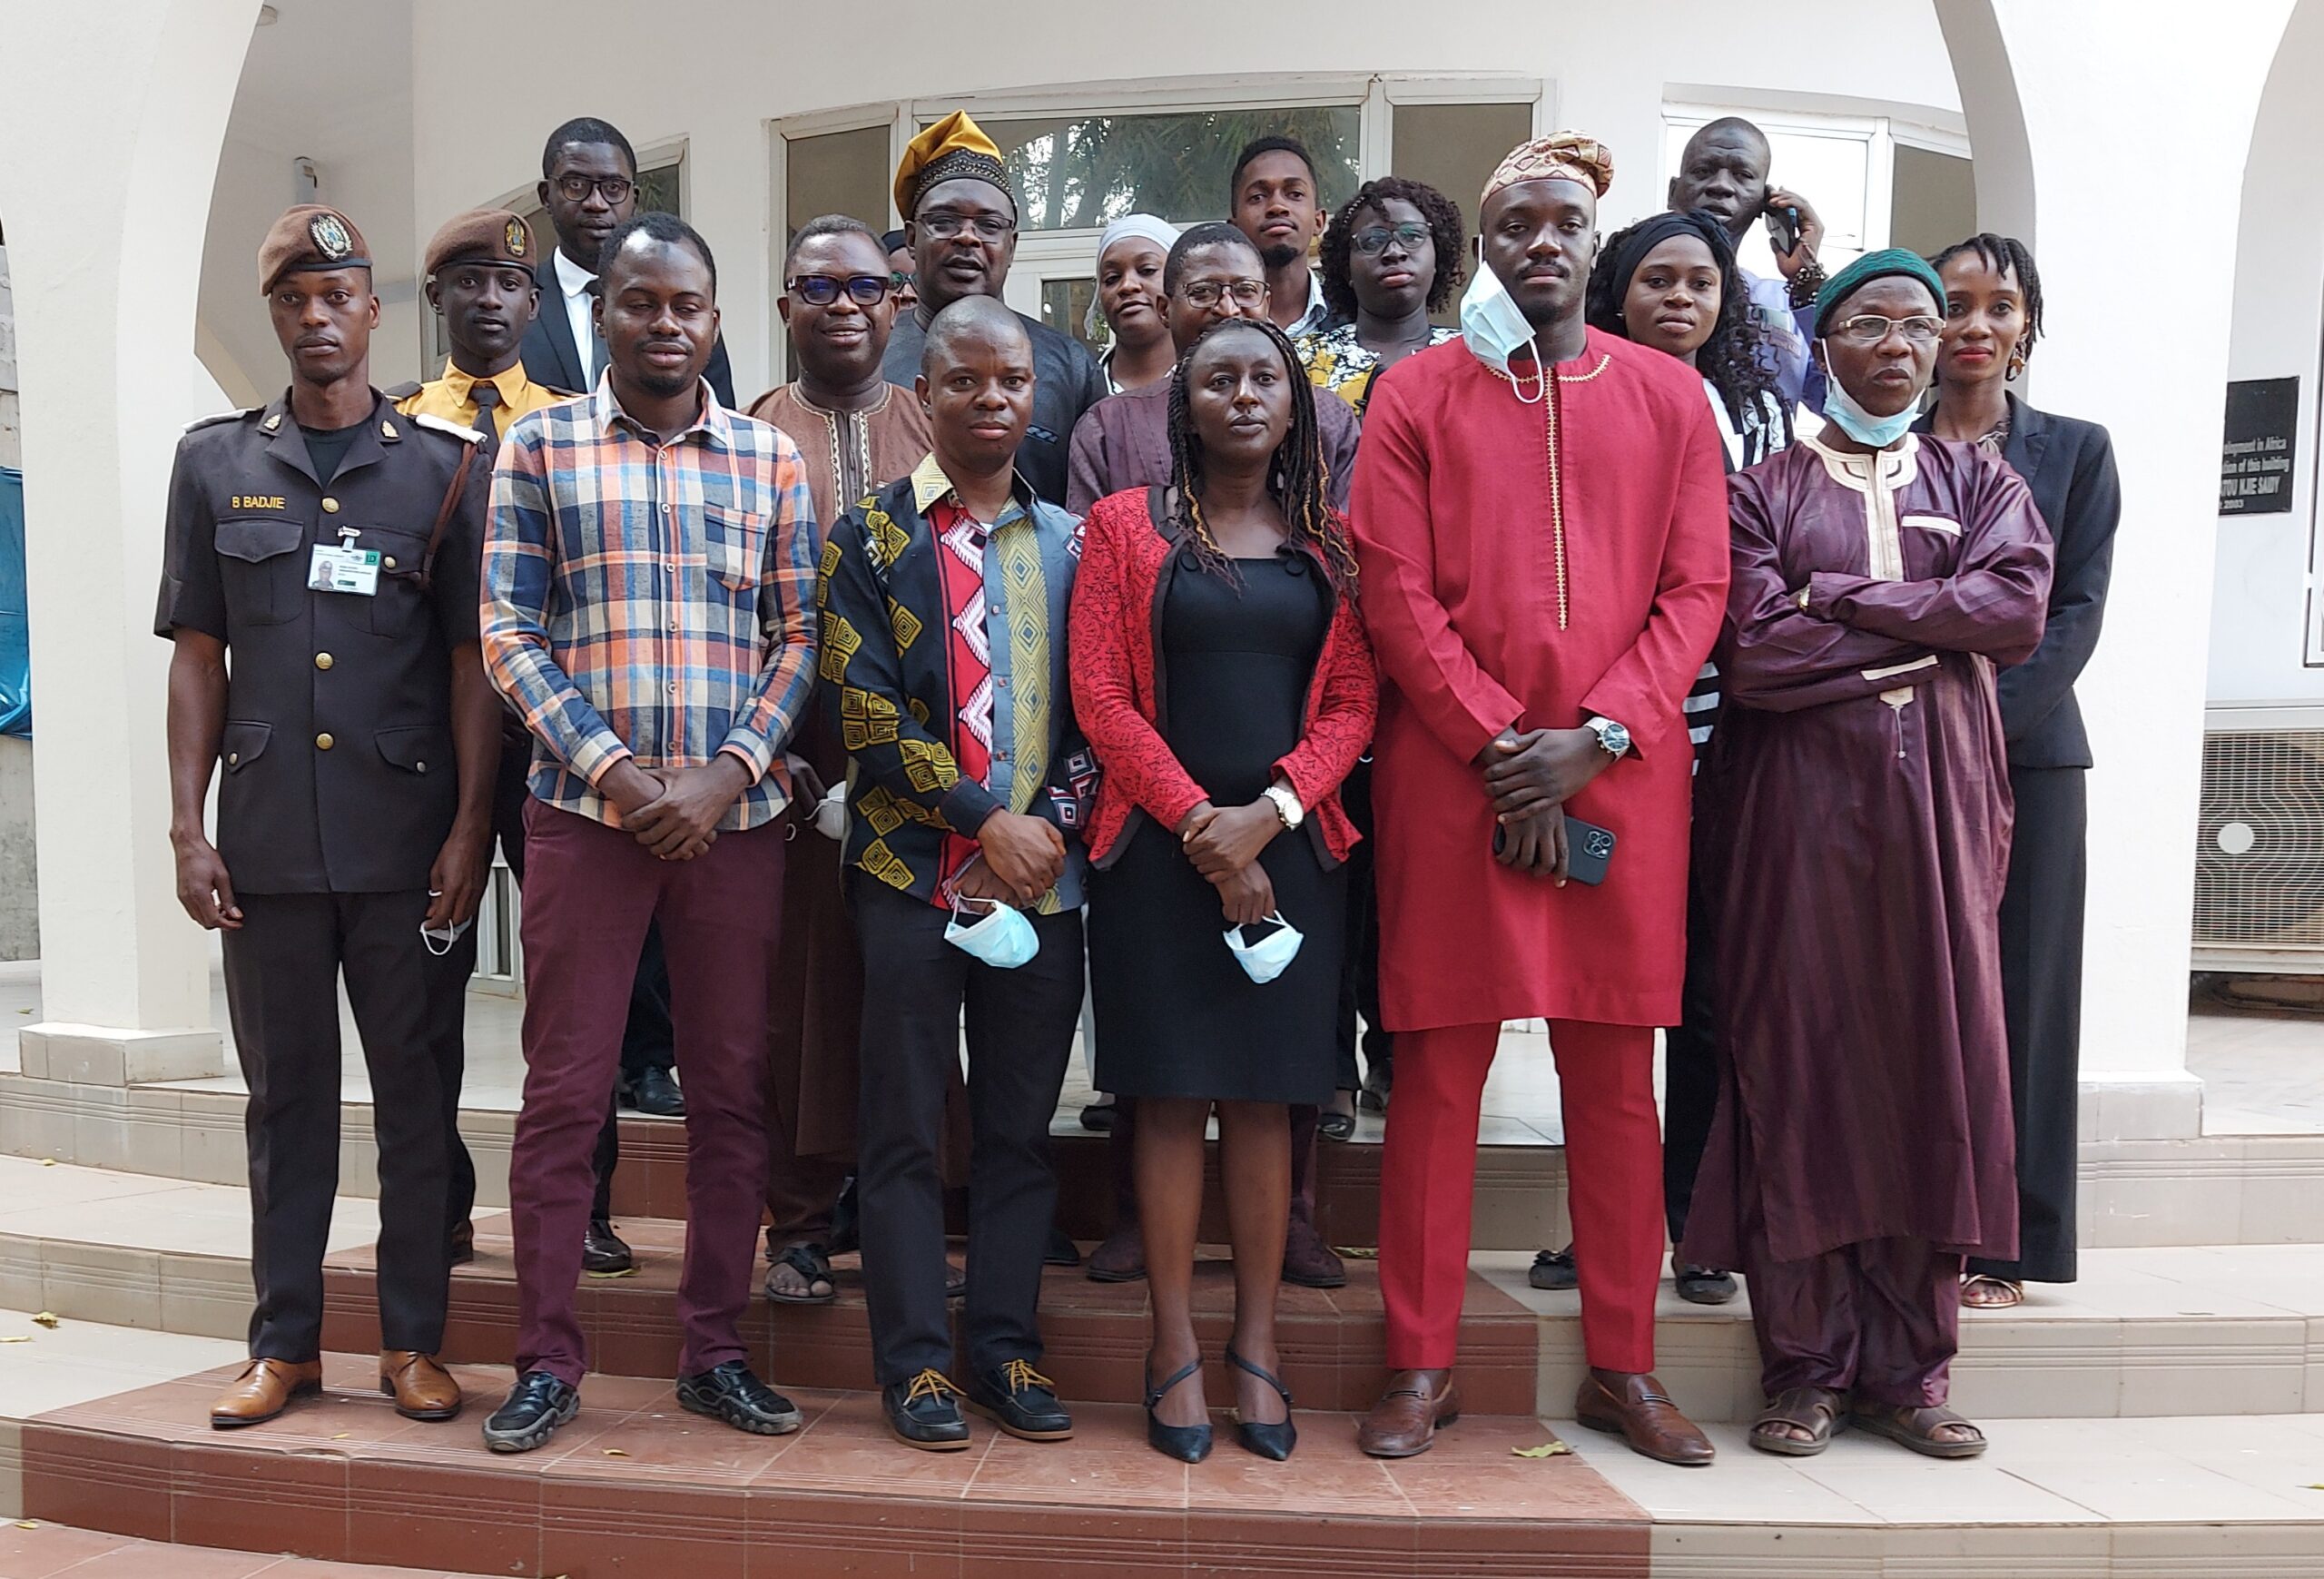 IHRDA sensitizes key Gambia stakeholders on decriminalization, policing of petty offences